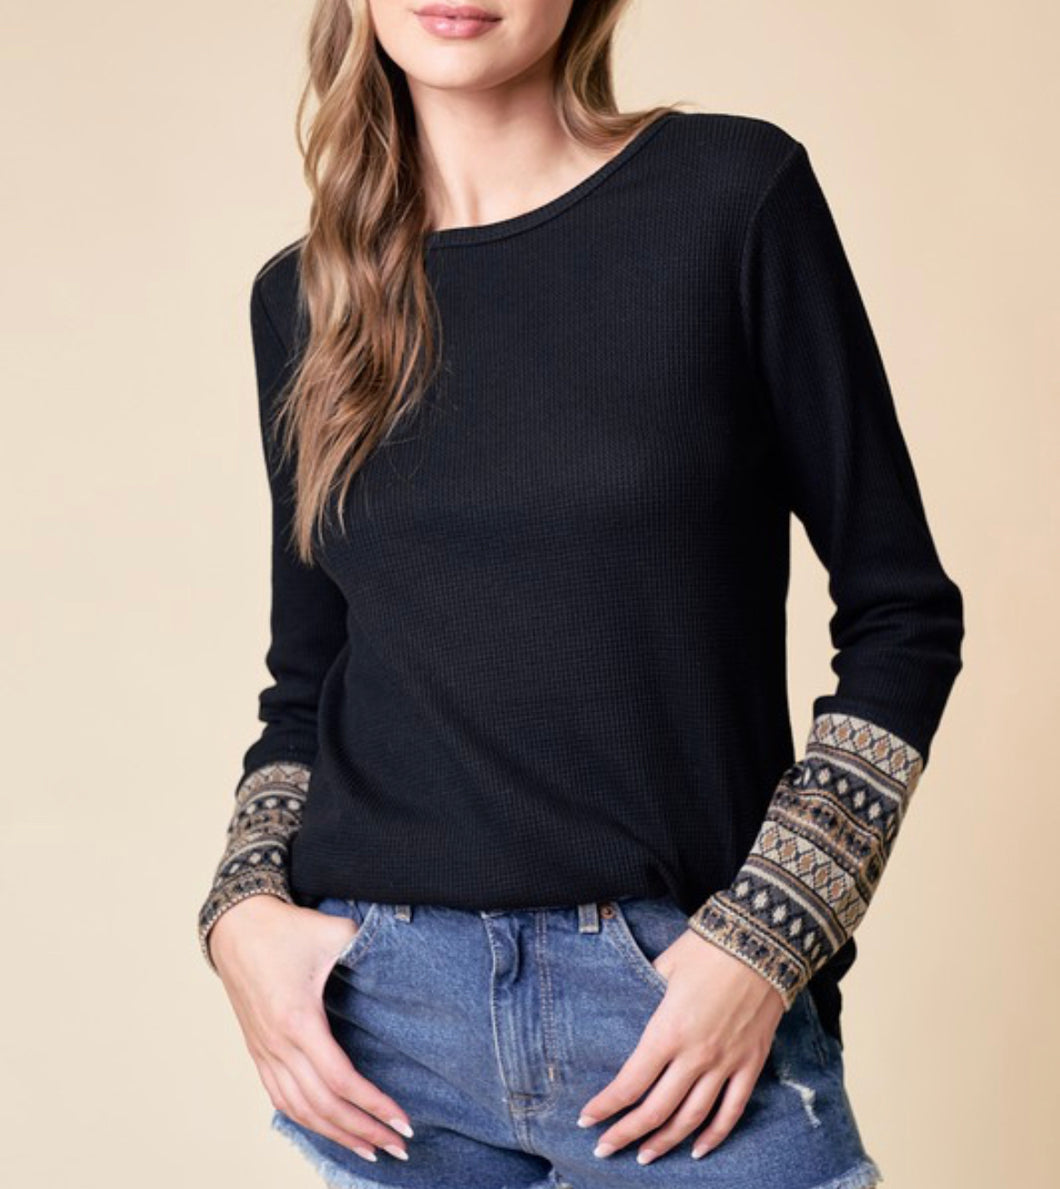 Black Long Sleeve Top with Contrast Cuff